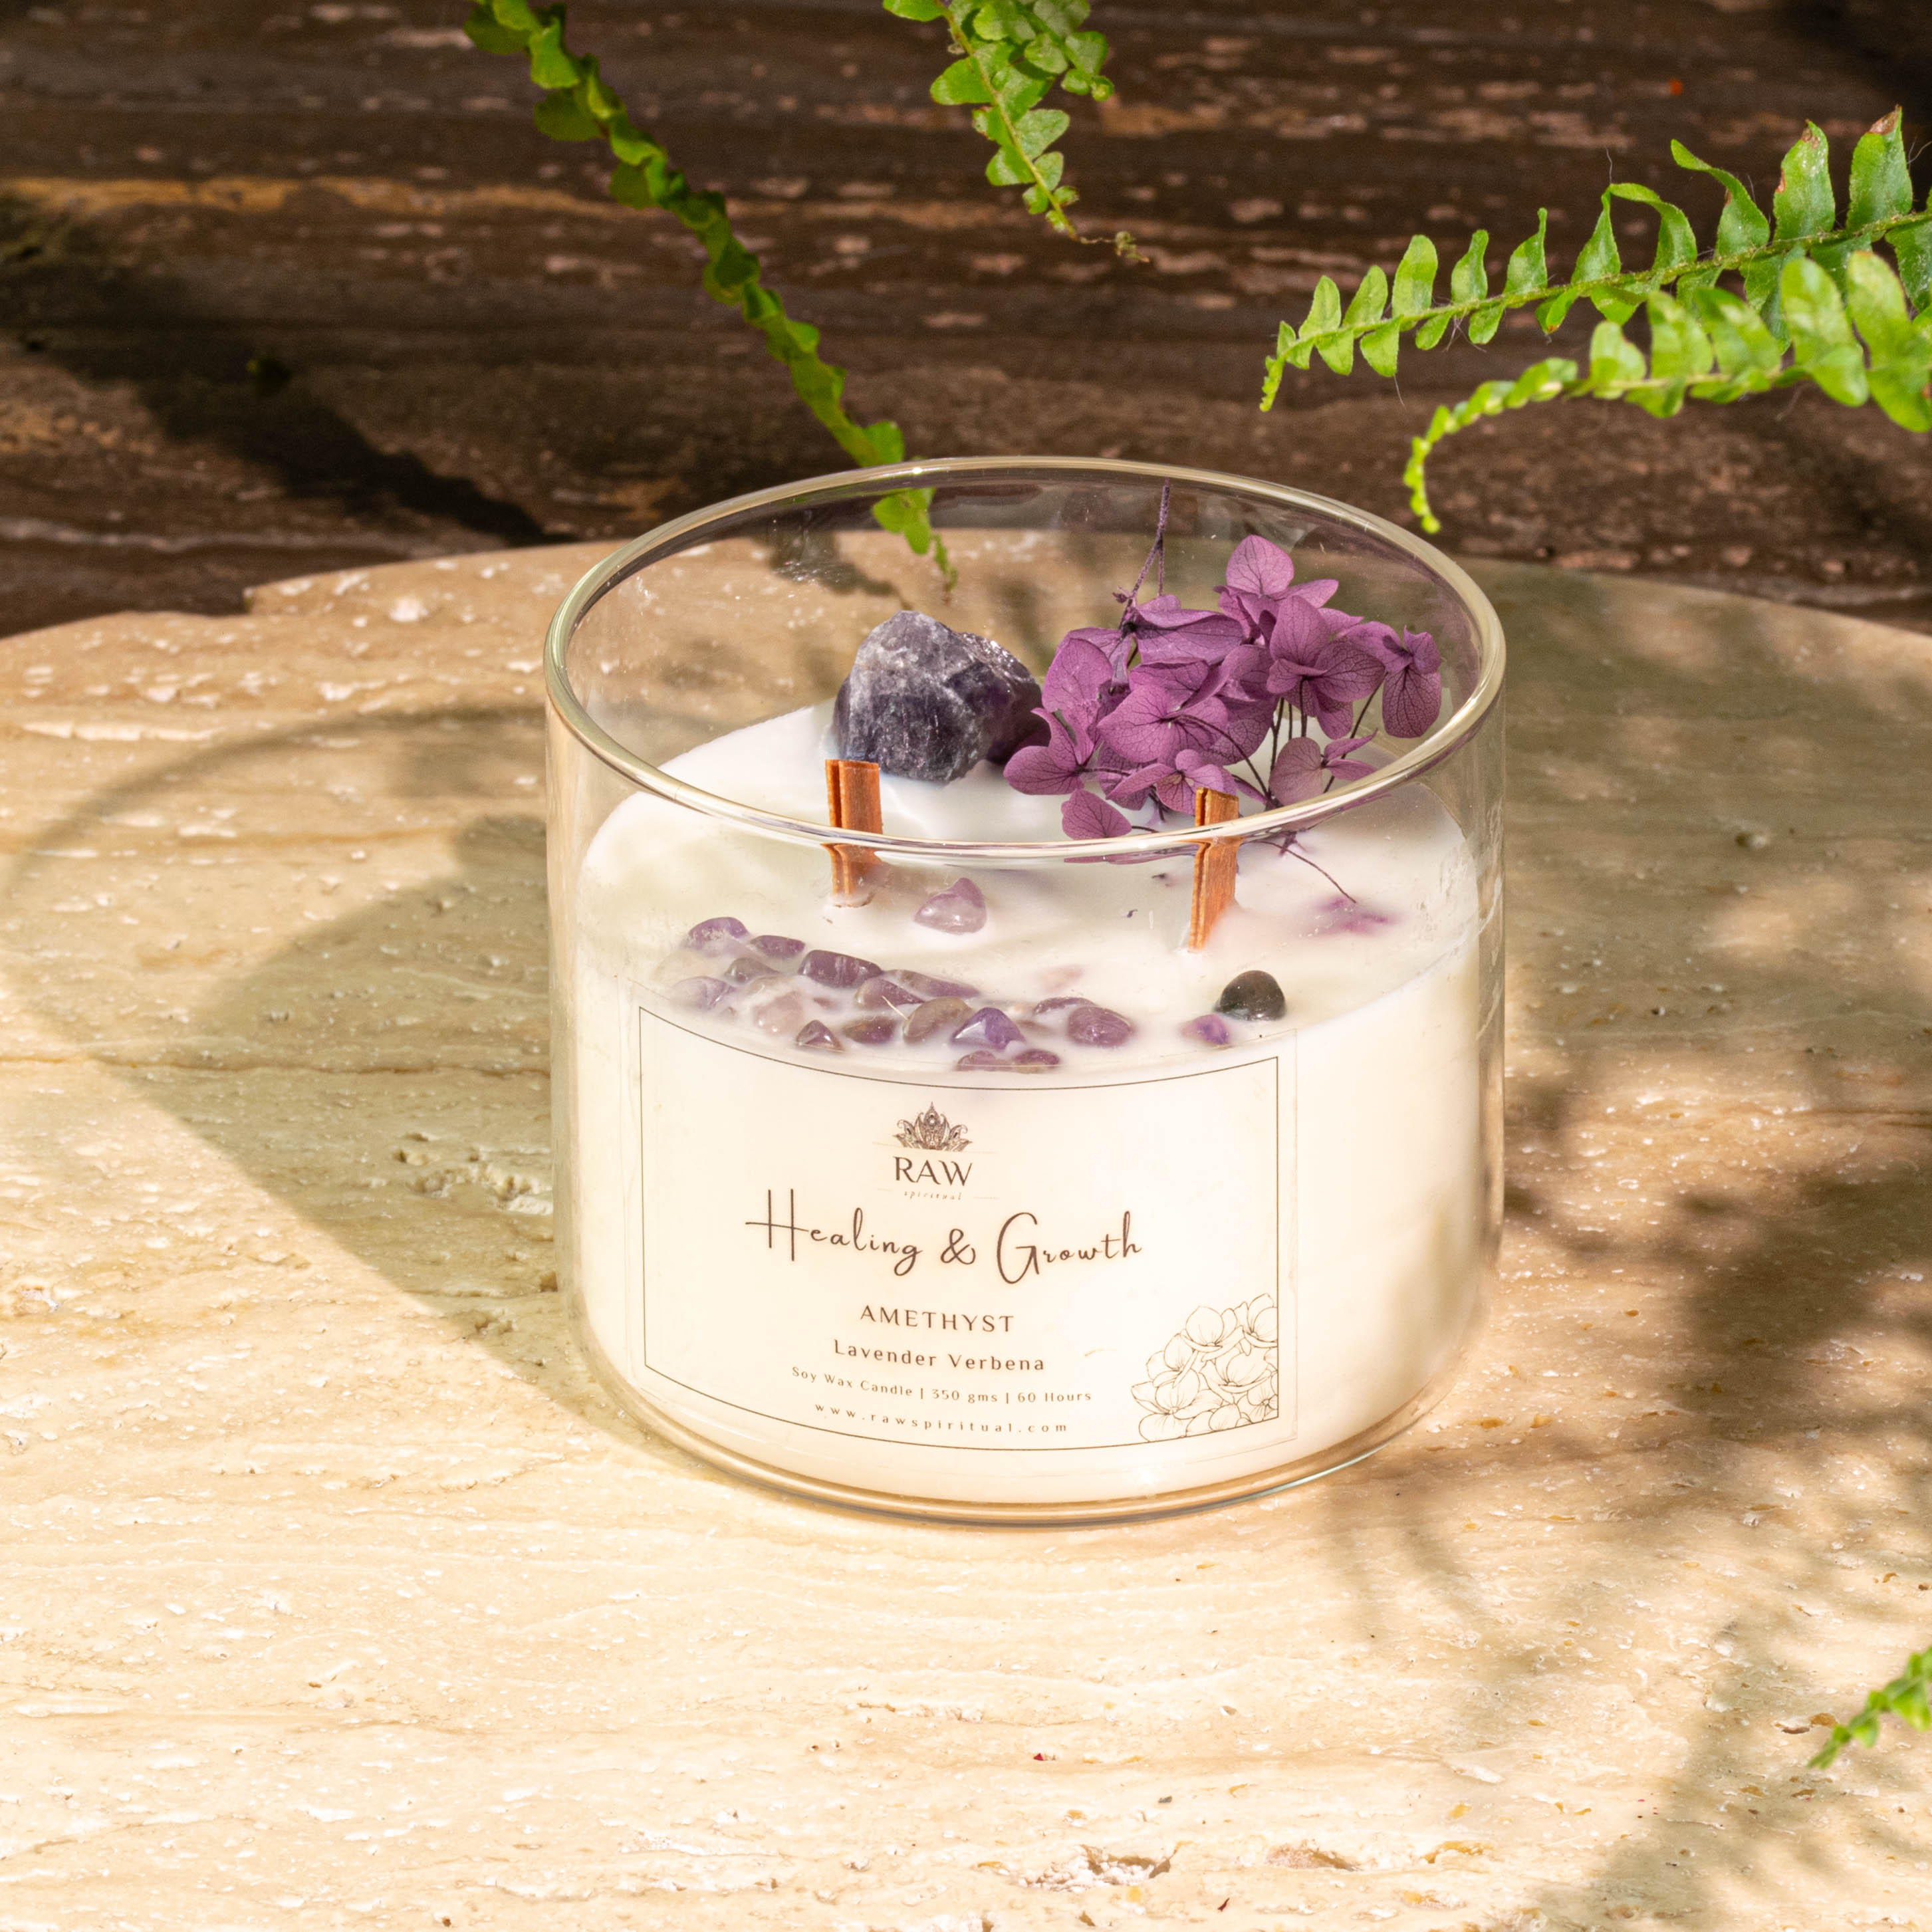 Amethyst Aromatherapy Crystal Candle for Healing & Growth